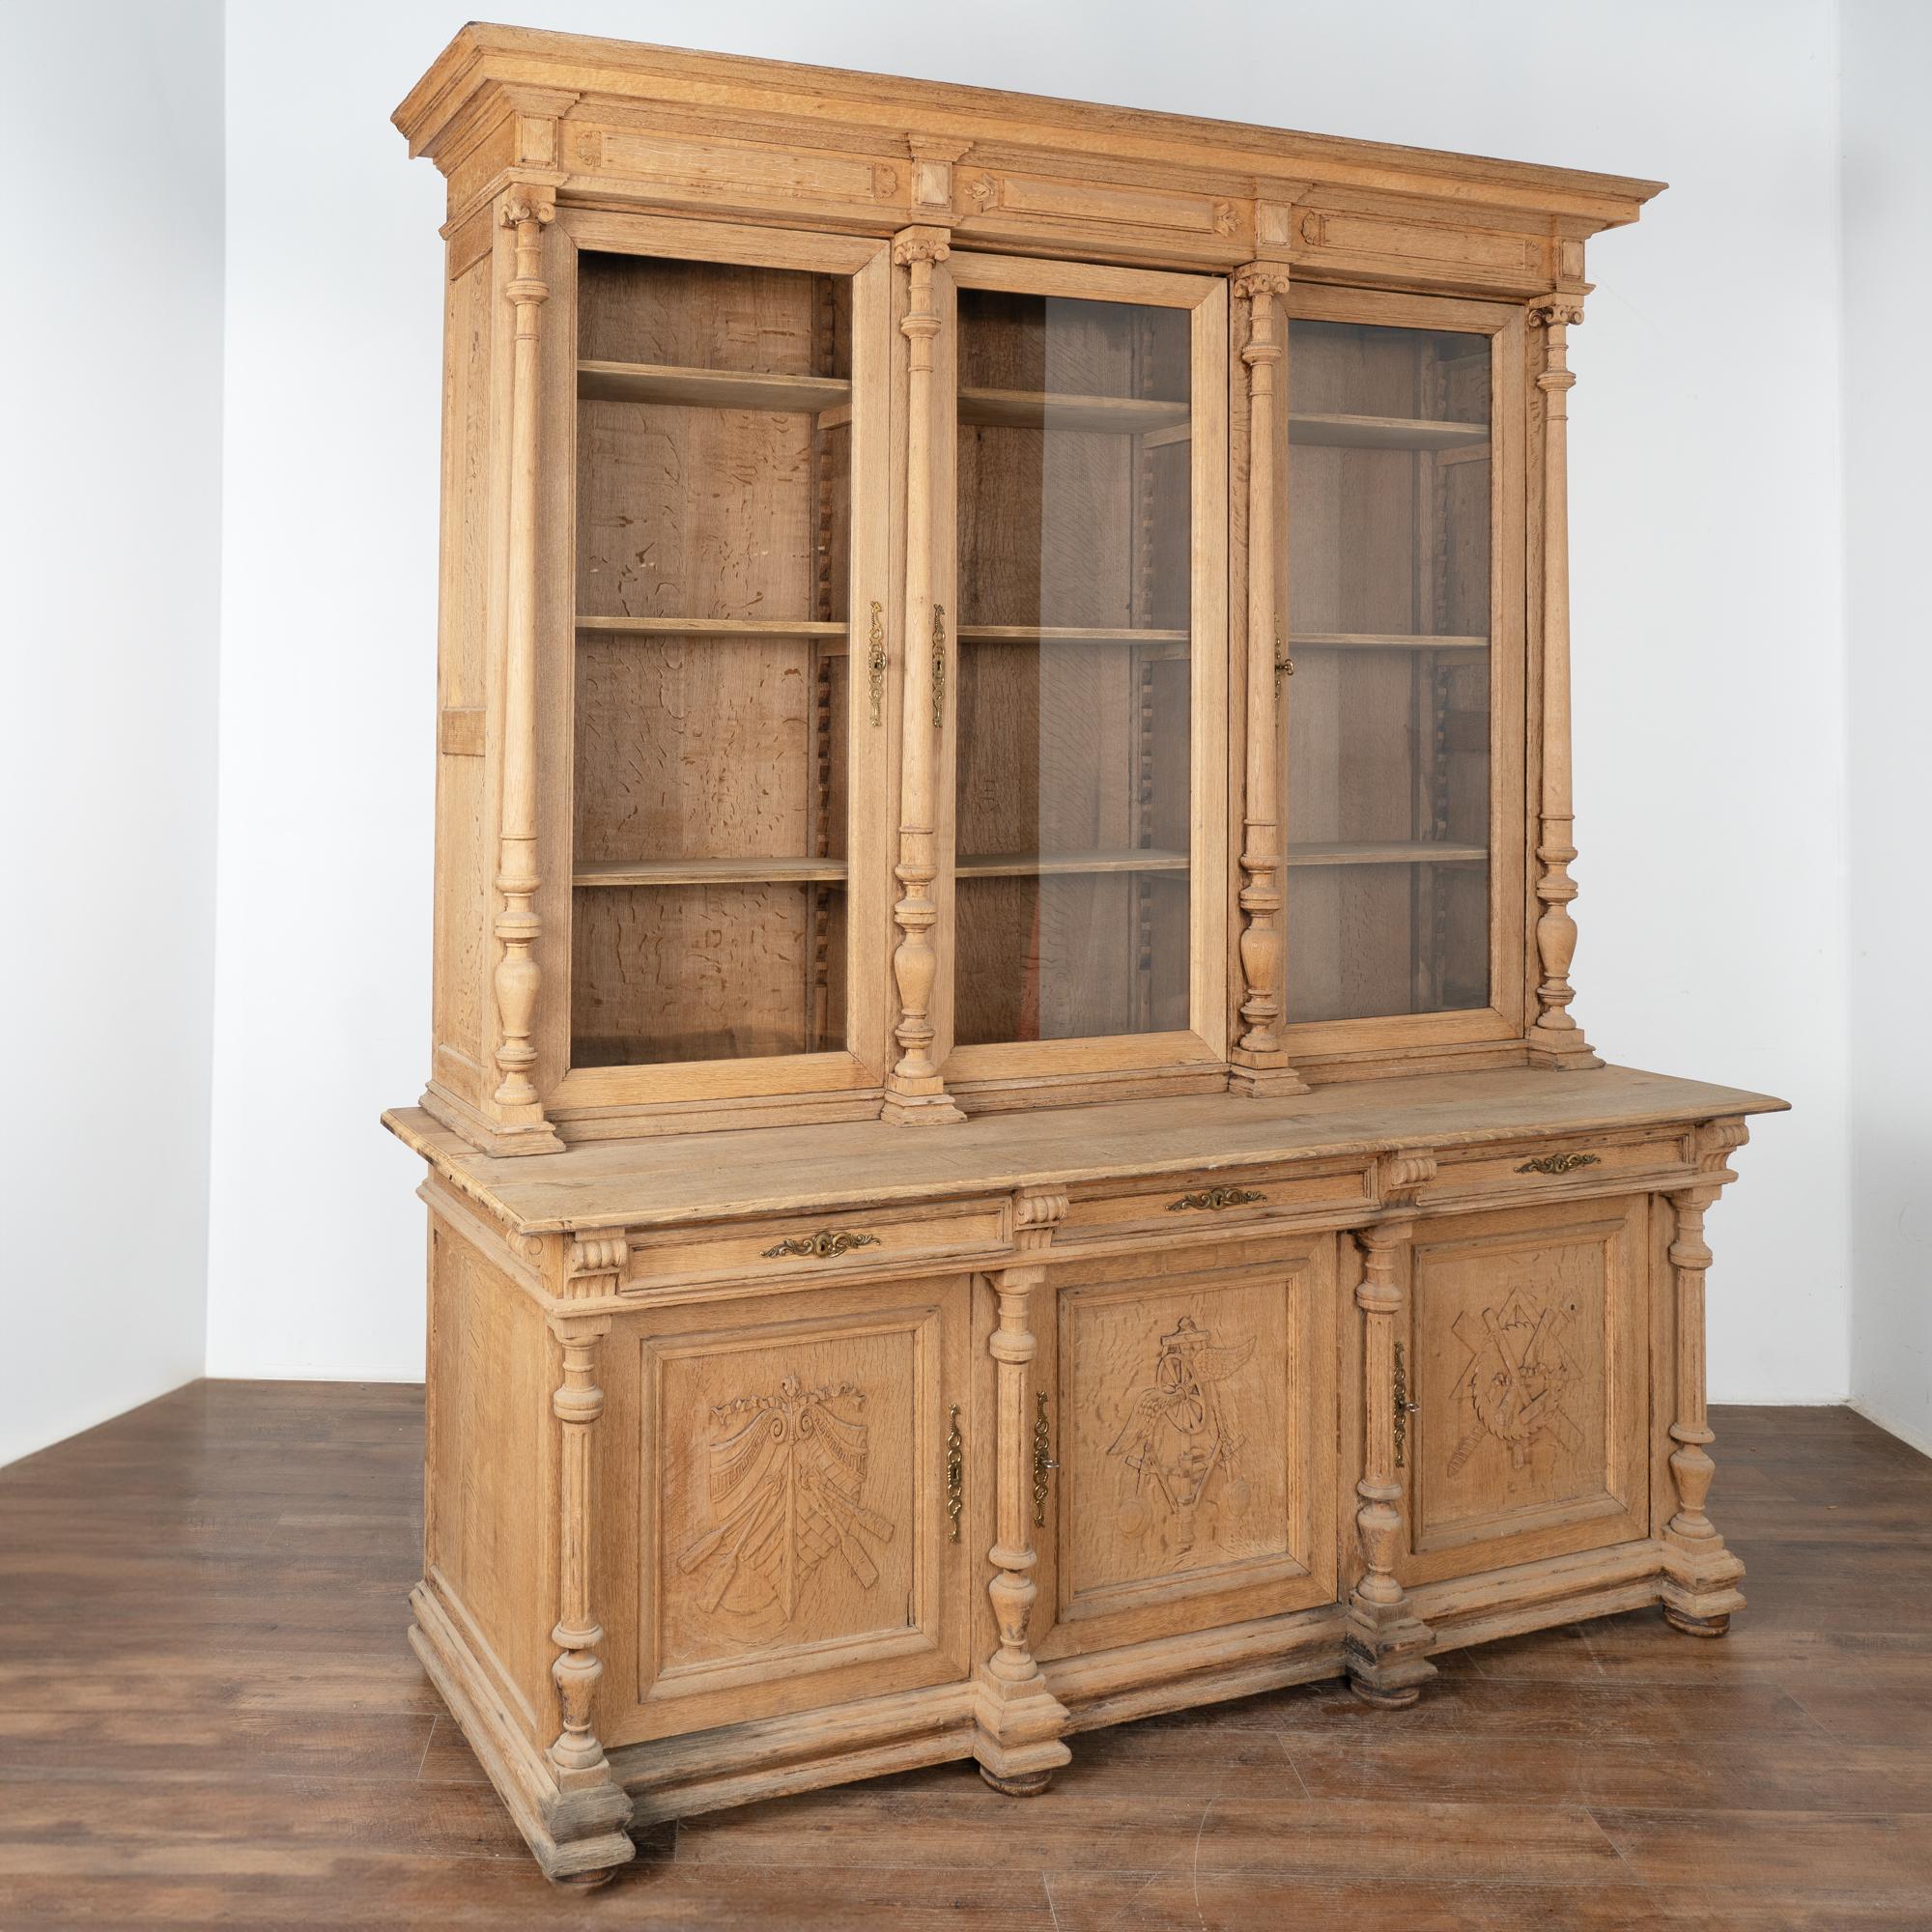 This large bleached oak bookcase is statuesque in size and is impressive with turned columns and 3 carved panel doors.
At 8' tall, the glass door panes add to its visual impact displaying any collection held within; adjustable shelving adds to the